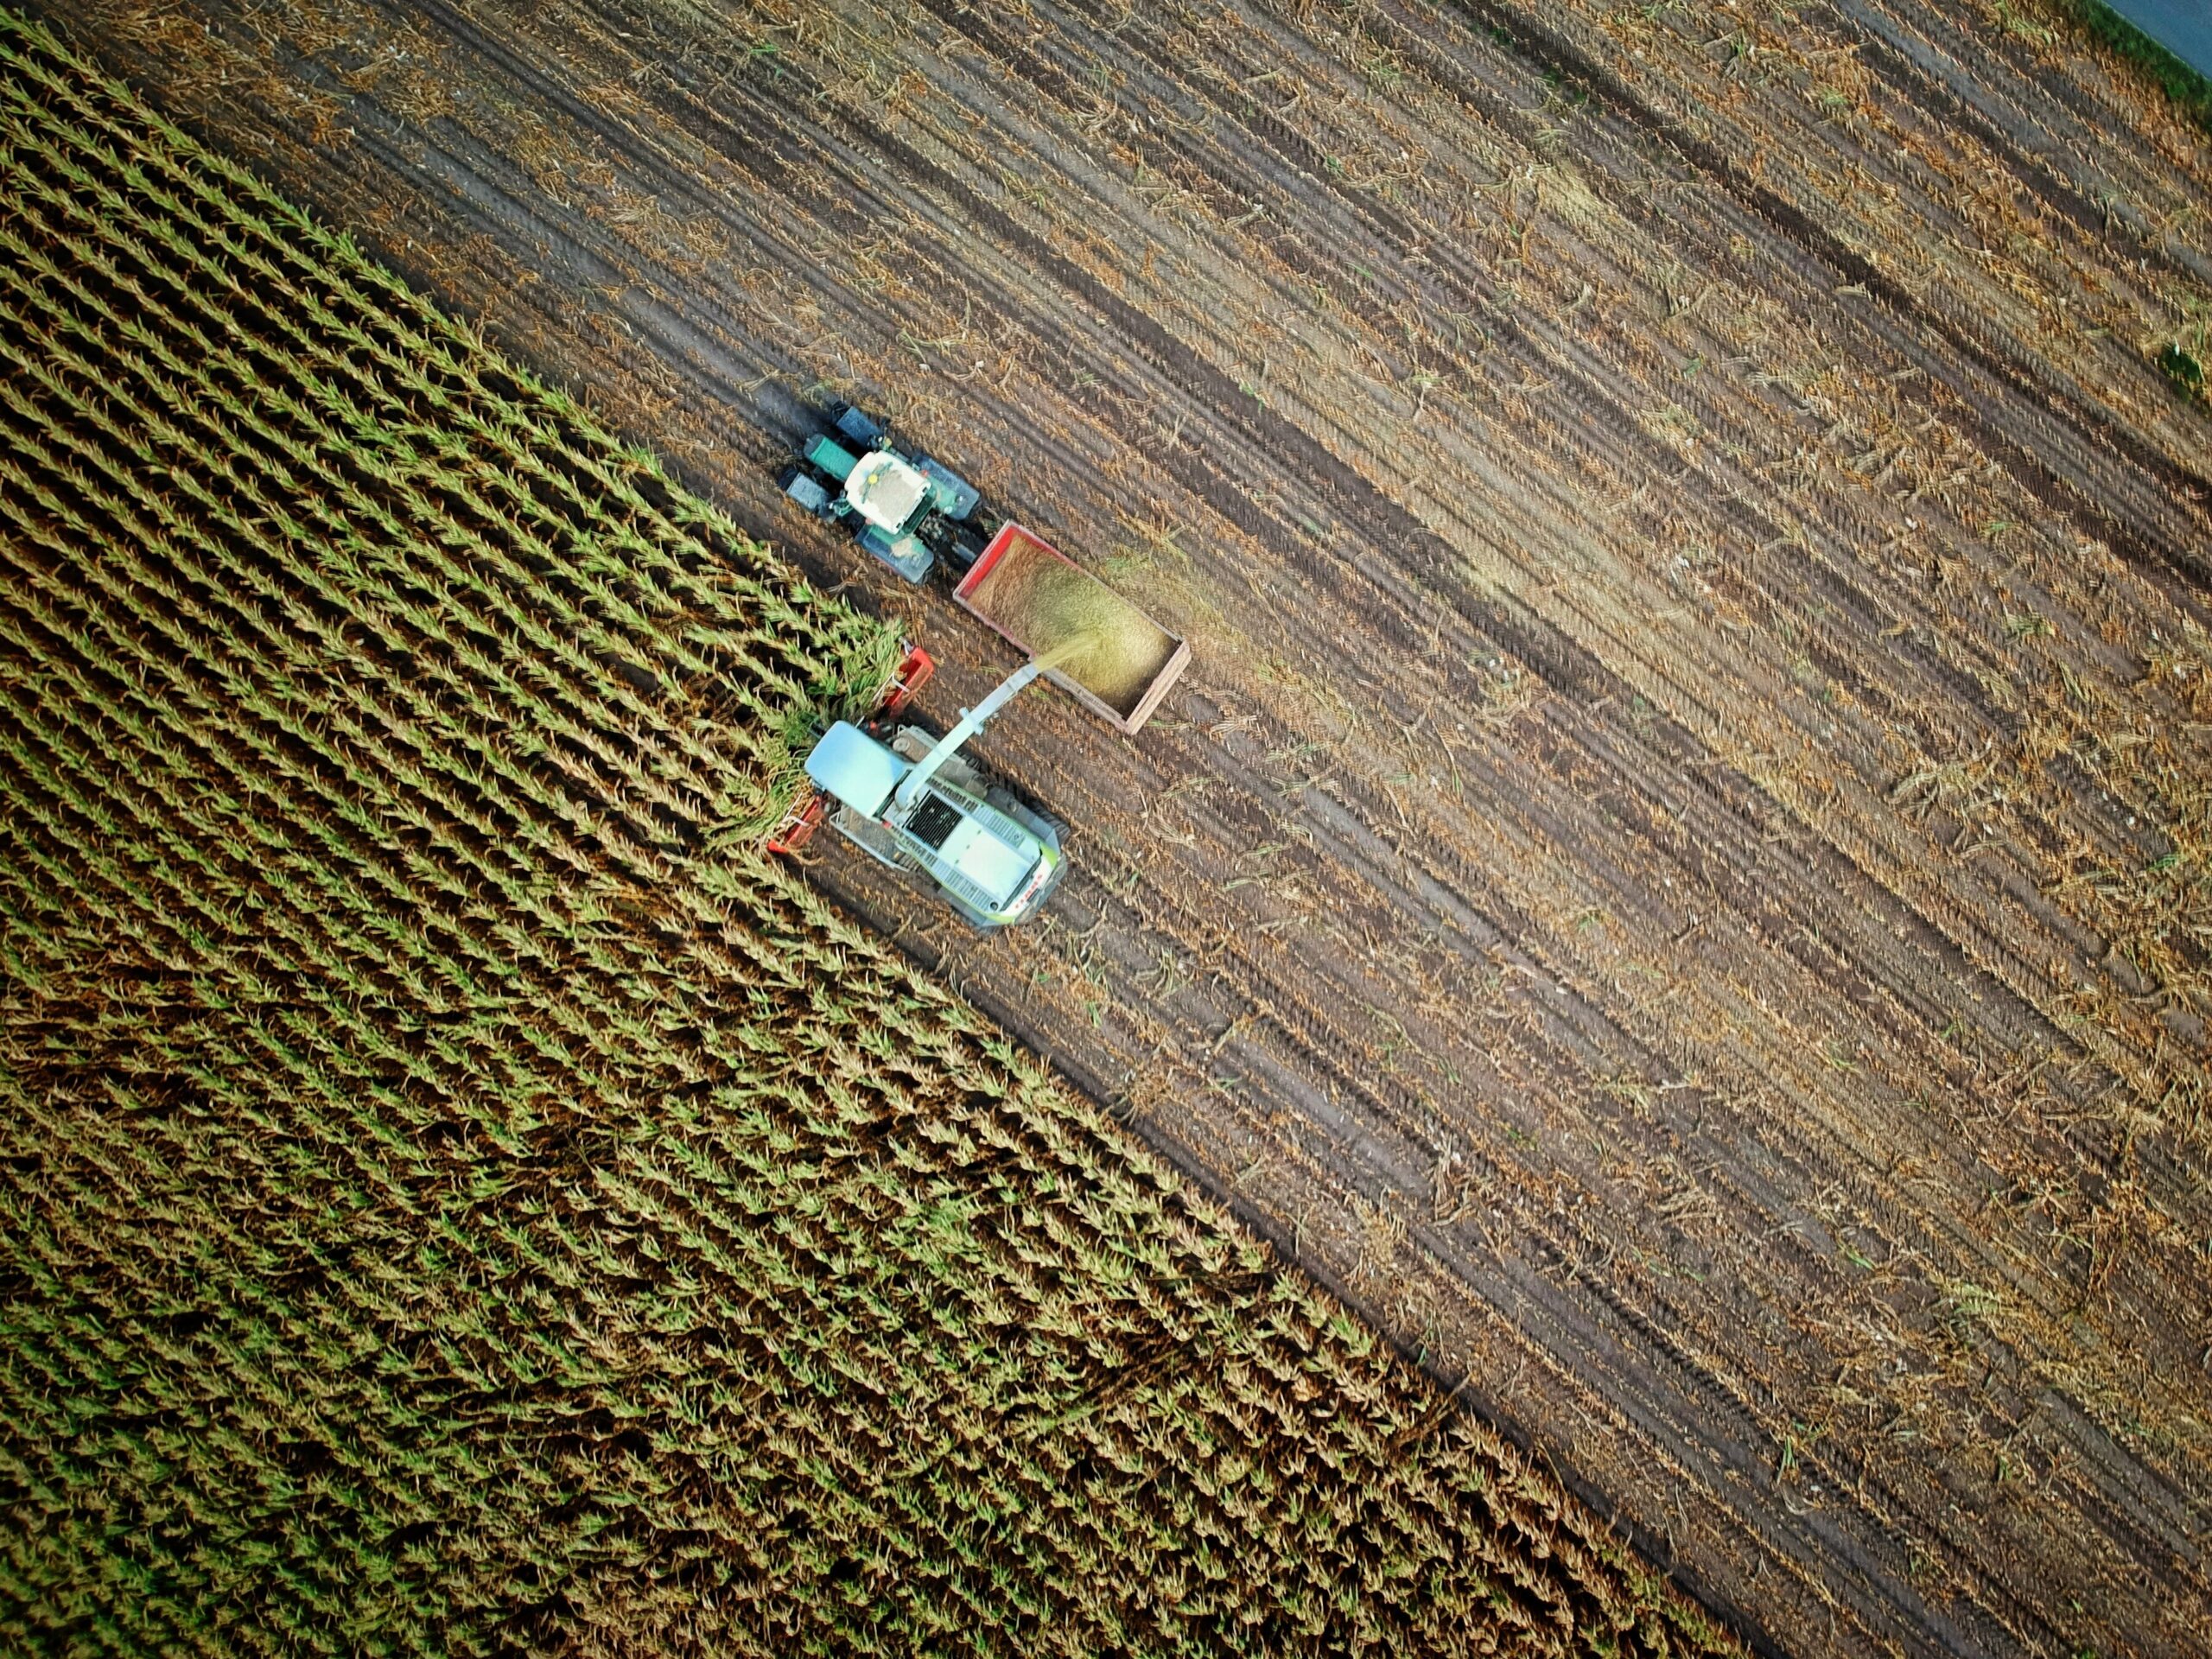 Two tractors on a plant field.